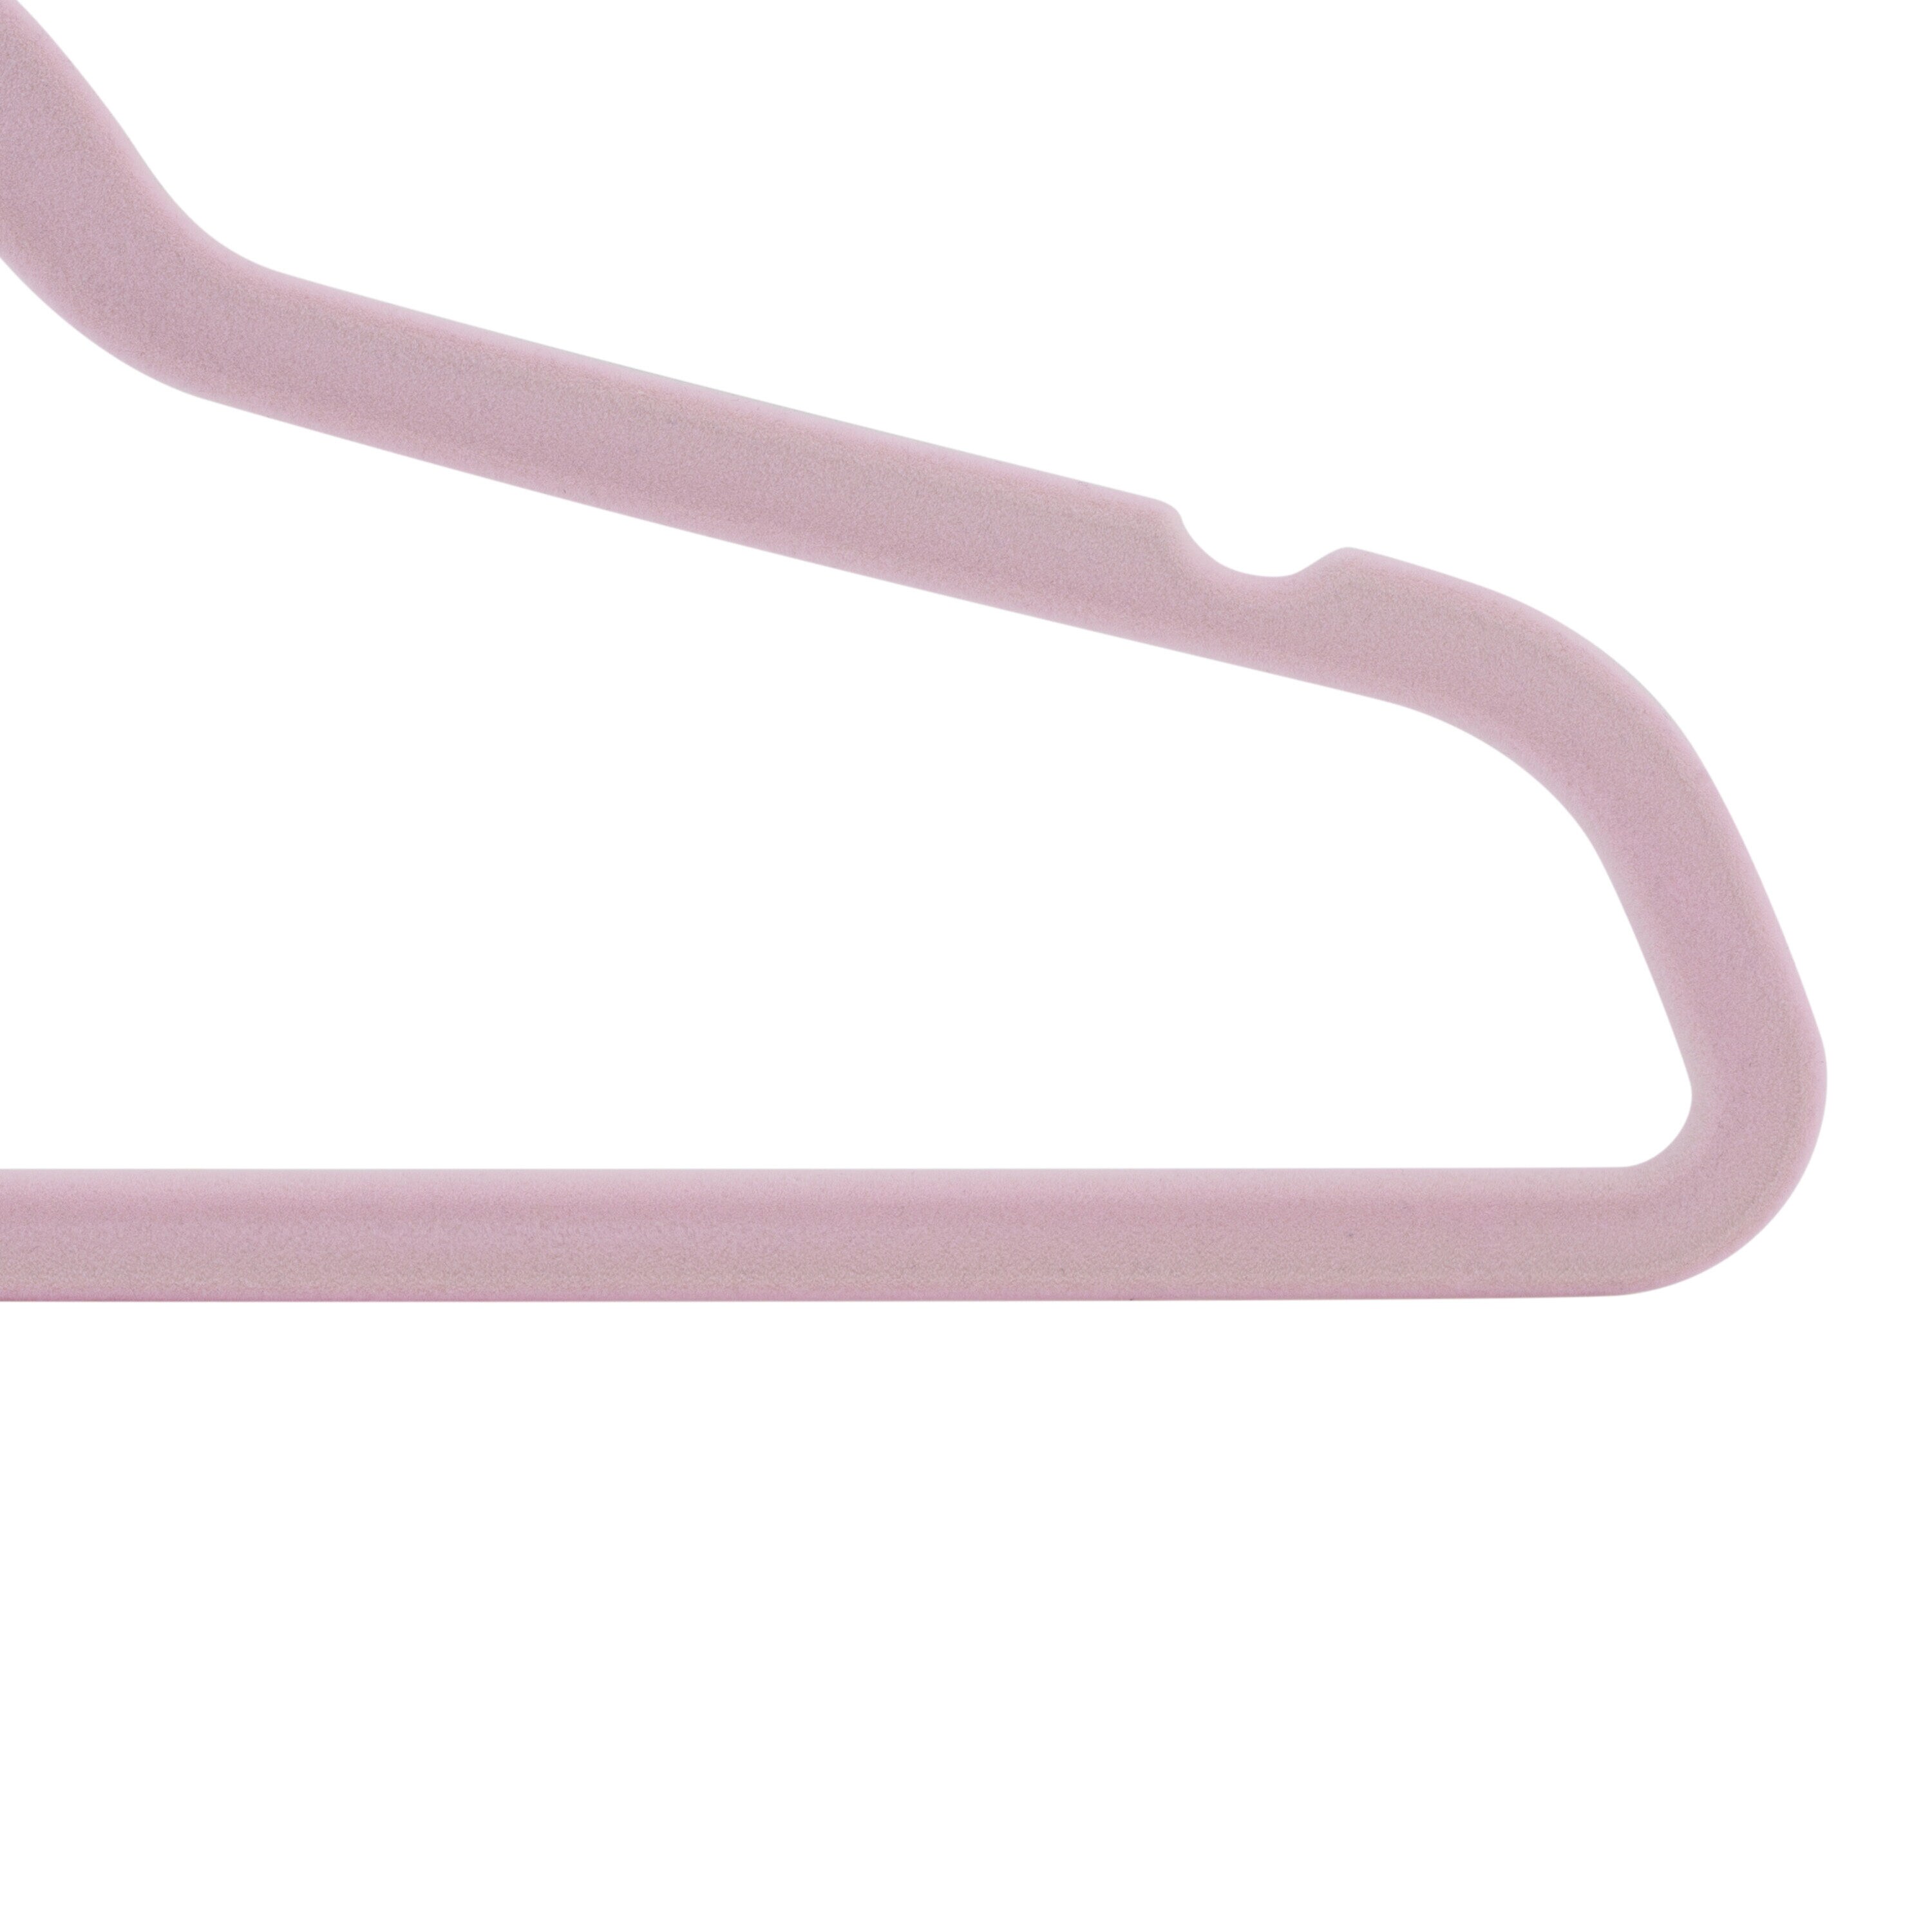 Laura Ashley Hangers Plastic Non-slip Grip Clothing Hanger (Pink) in the  Hangers department at